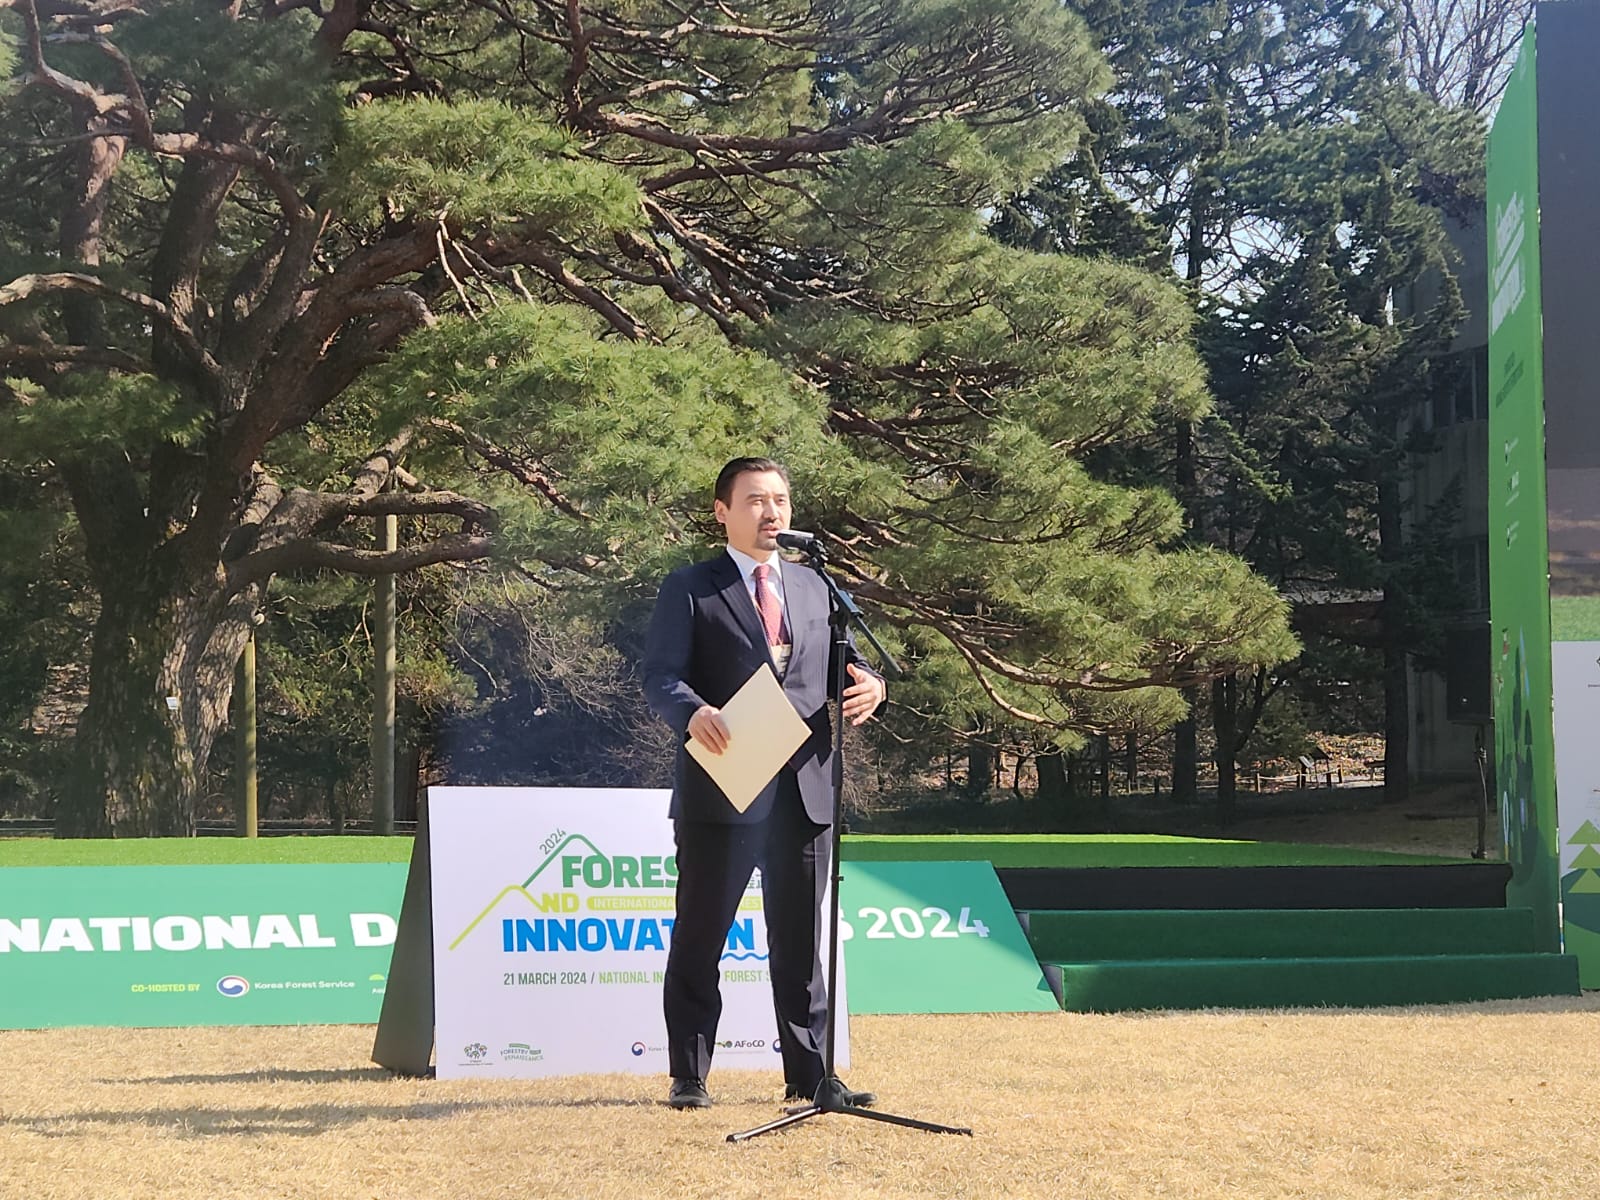 Remarks by Ambassador Nurgali Arystanov at the event “Forest and Innovation - New Solutions for a Better World” (March 21, 2024, Seoul)